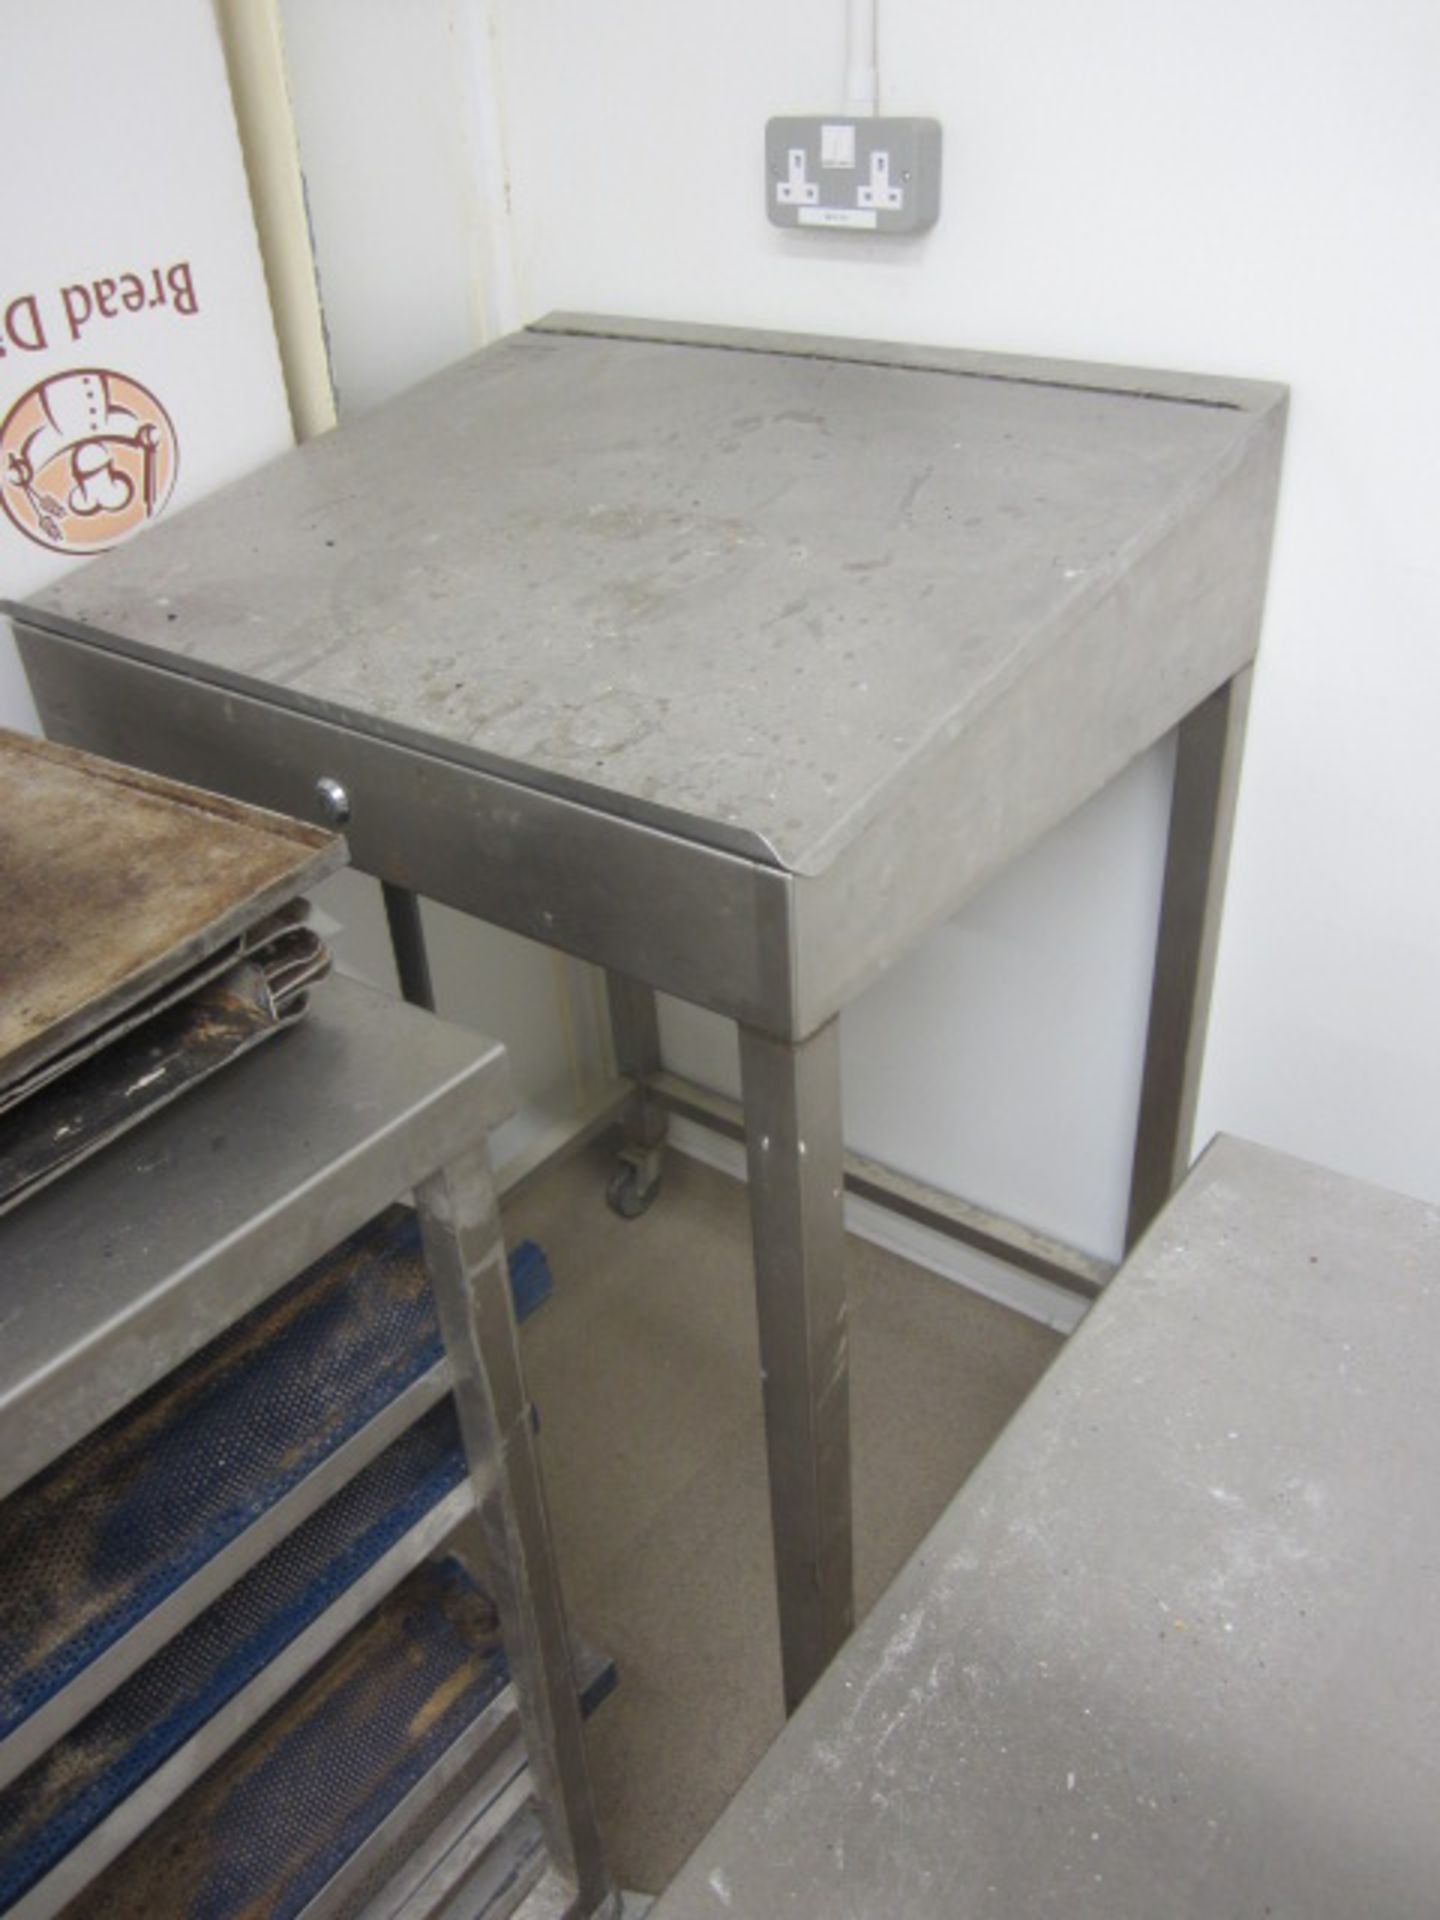 Stainless steel food preparation work surface. Approx. 900 x 600mm, a stainless steel 6-shelf mobile - Image 4 of 5